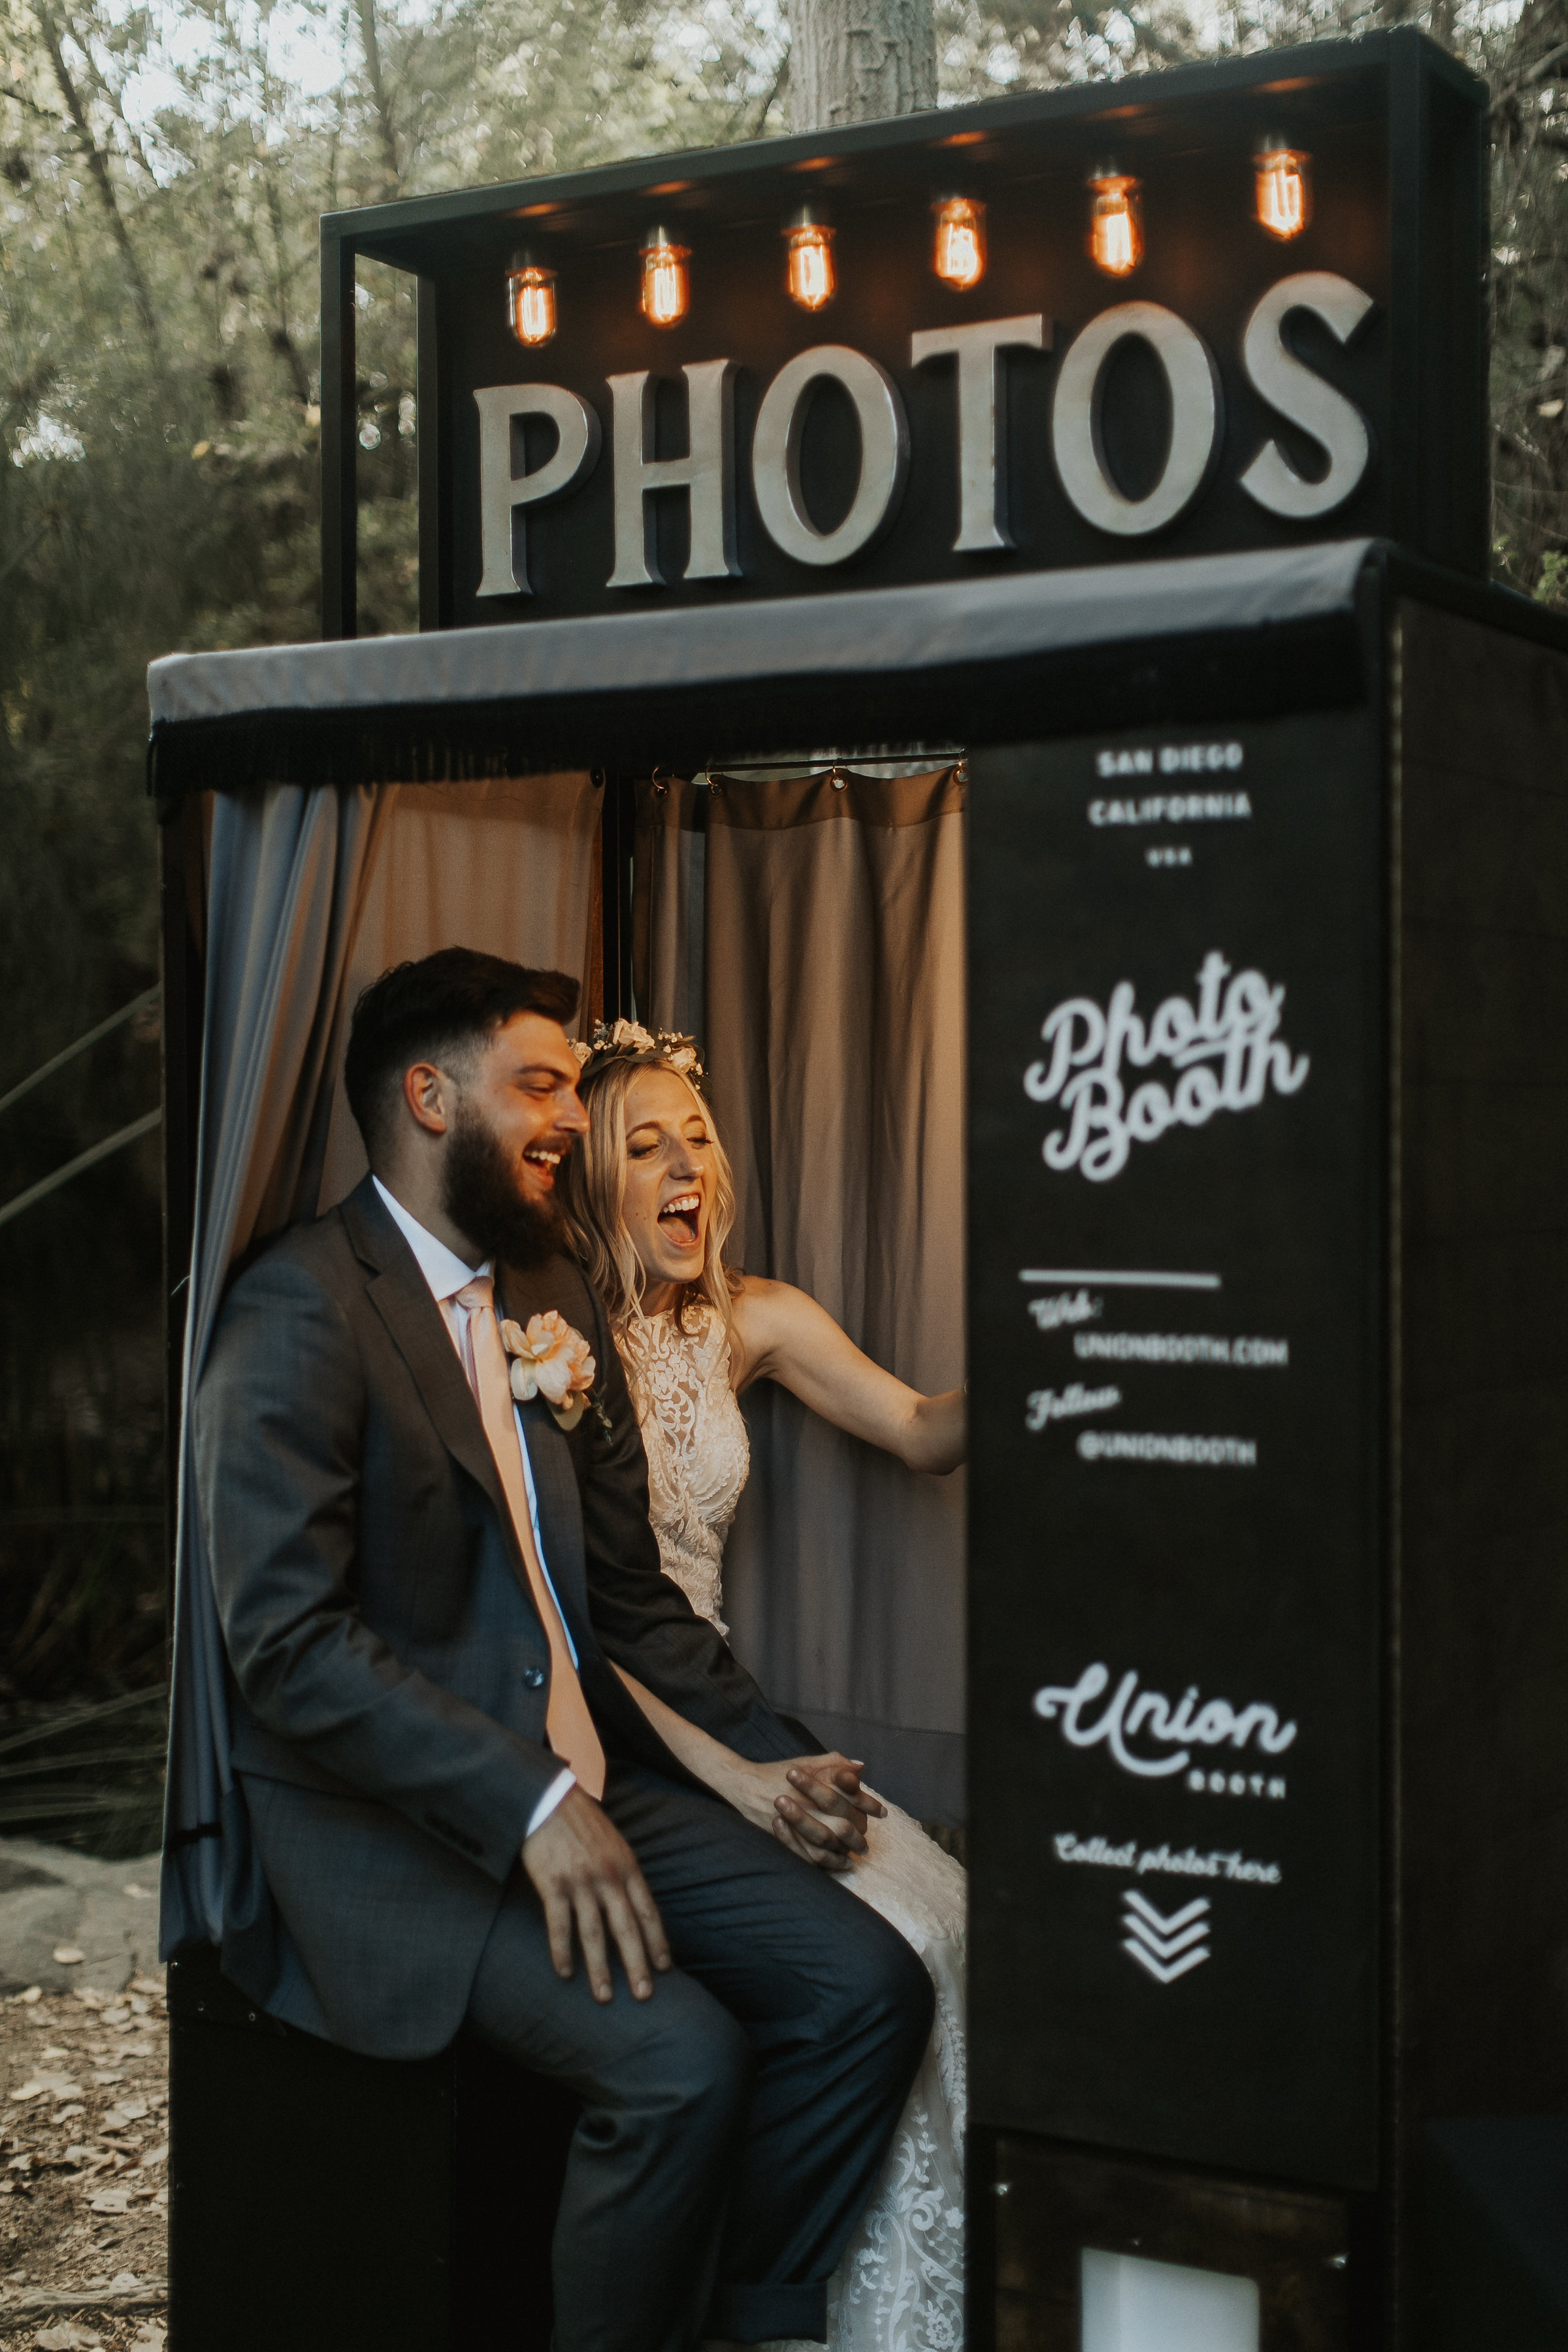 Vintage style wedding photo booth by Union Booth California